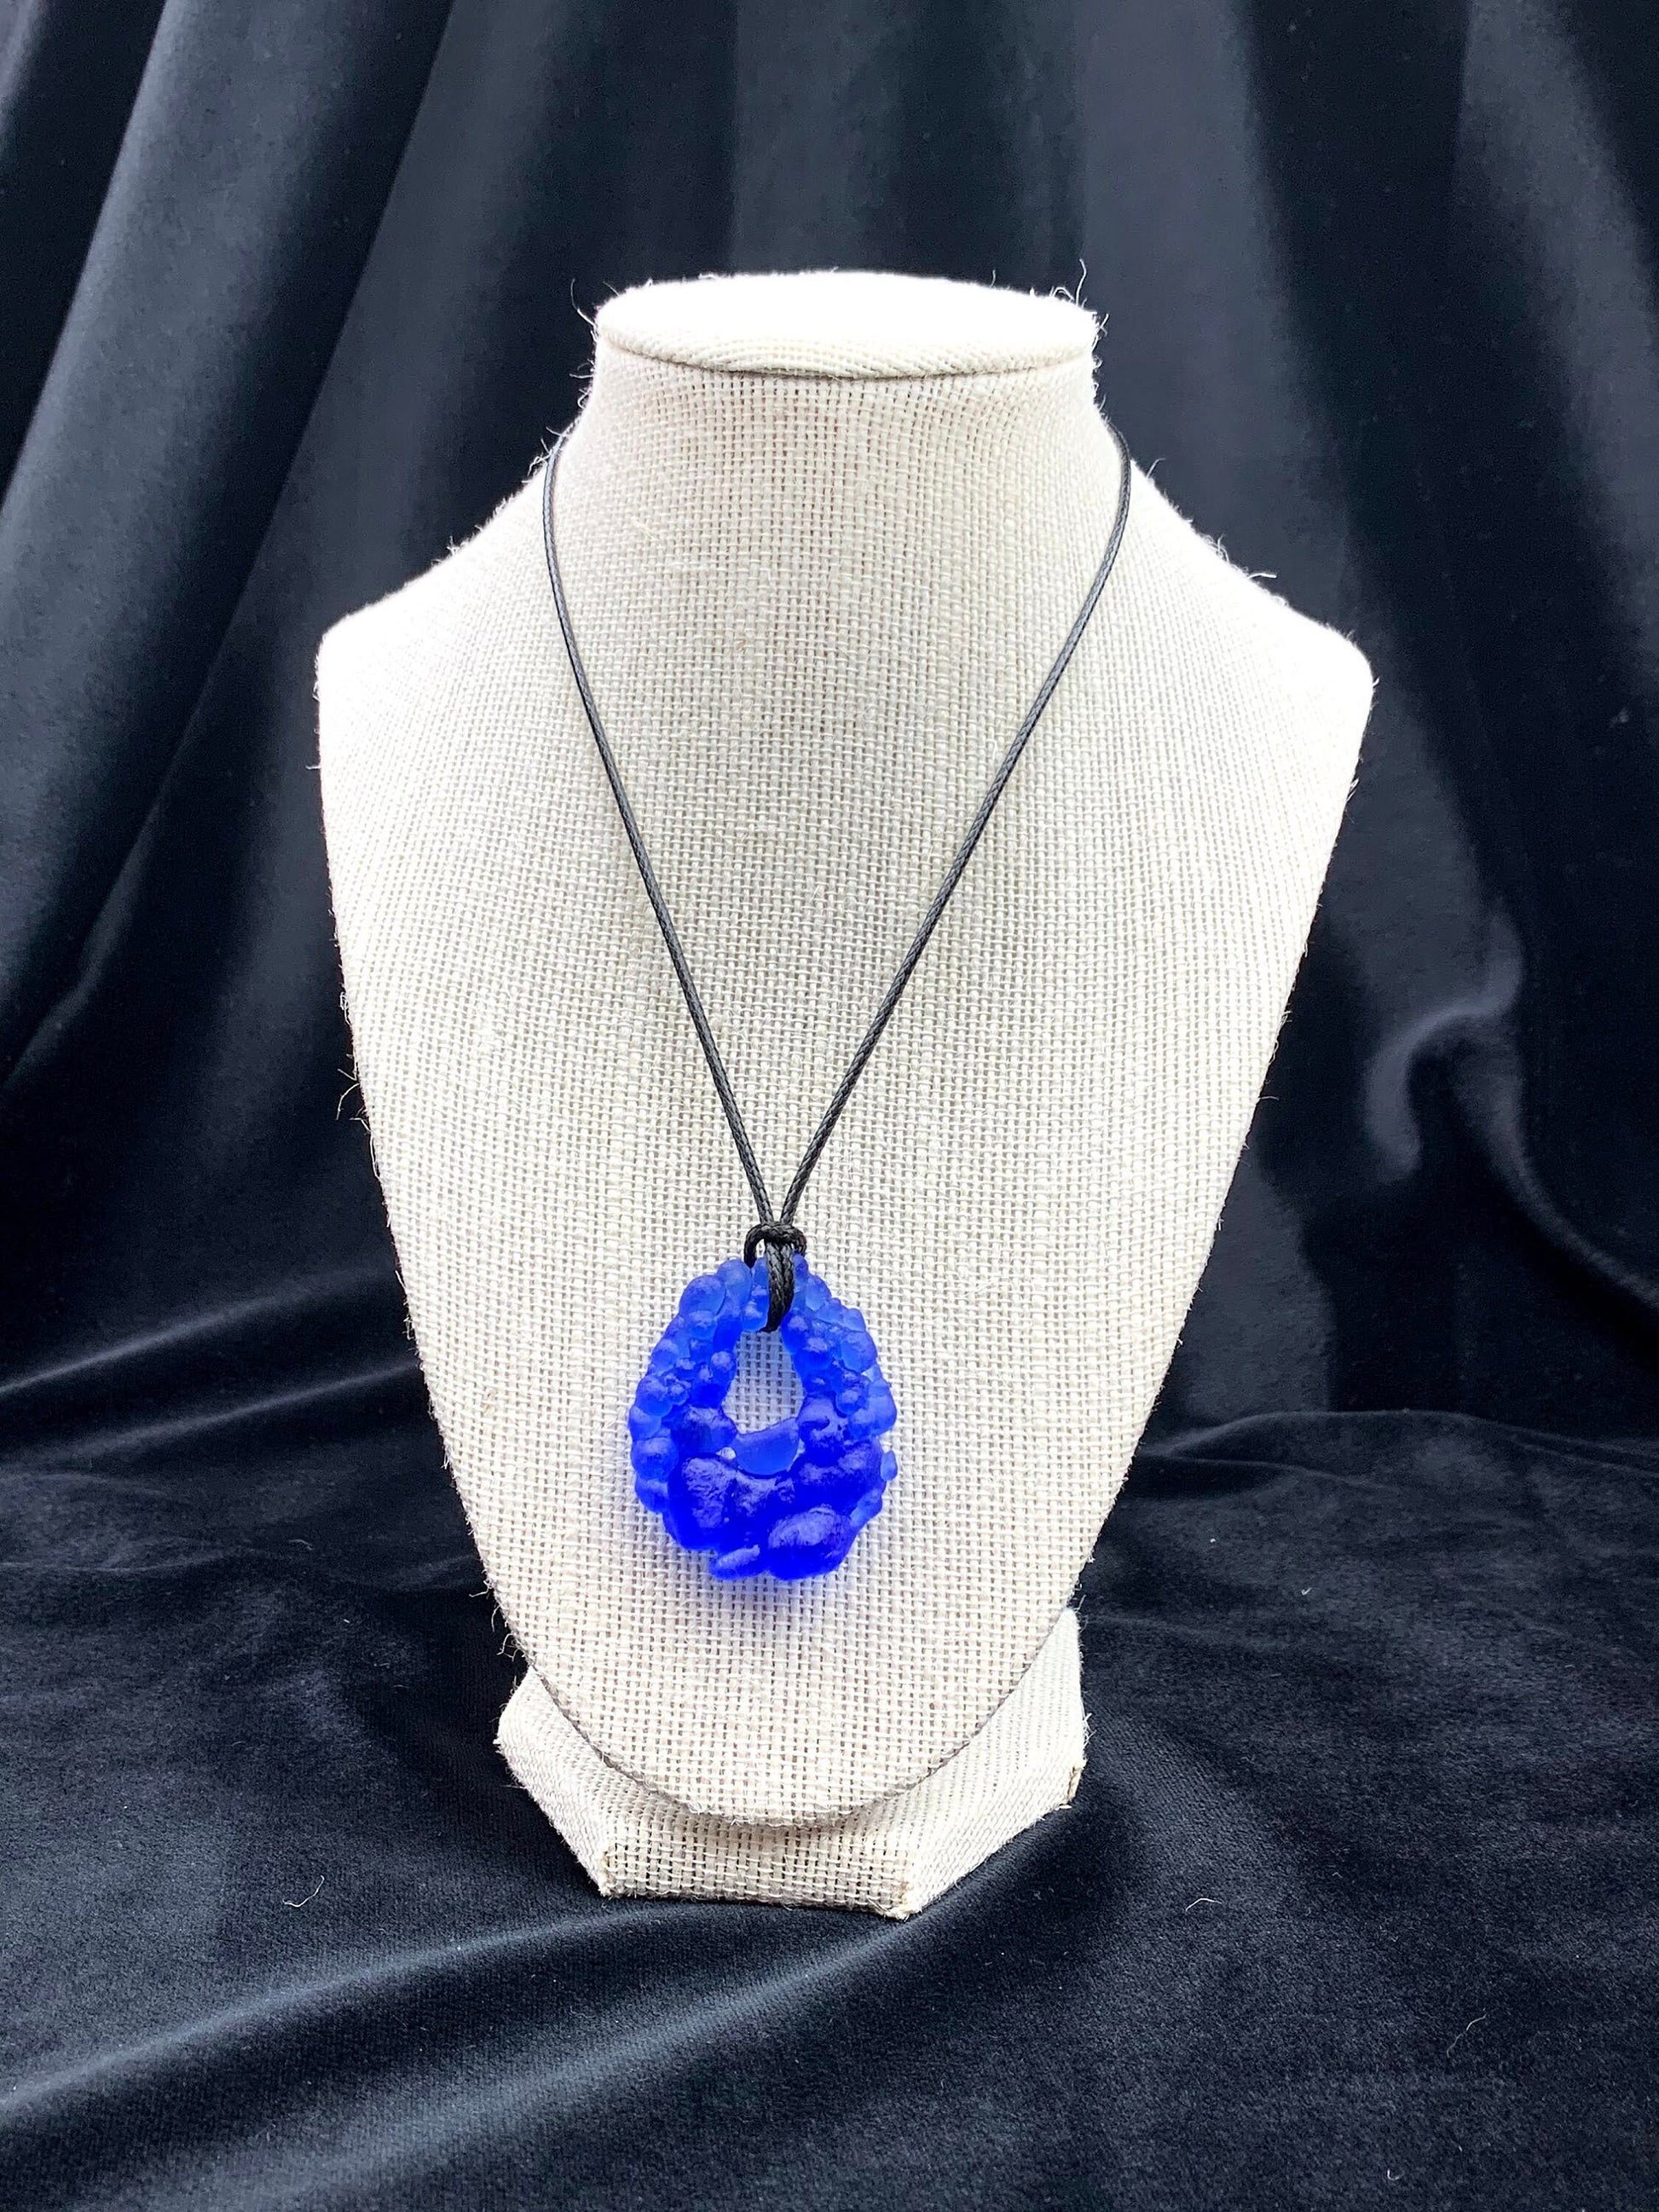 Upcycled Glass Jewelry, Blue Statement Pendant Necklace, Recycled Glass, Gift for Wine Lover, Glass Bottle Art